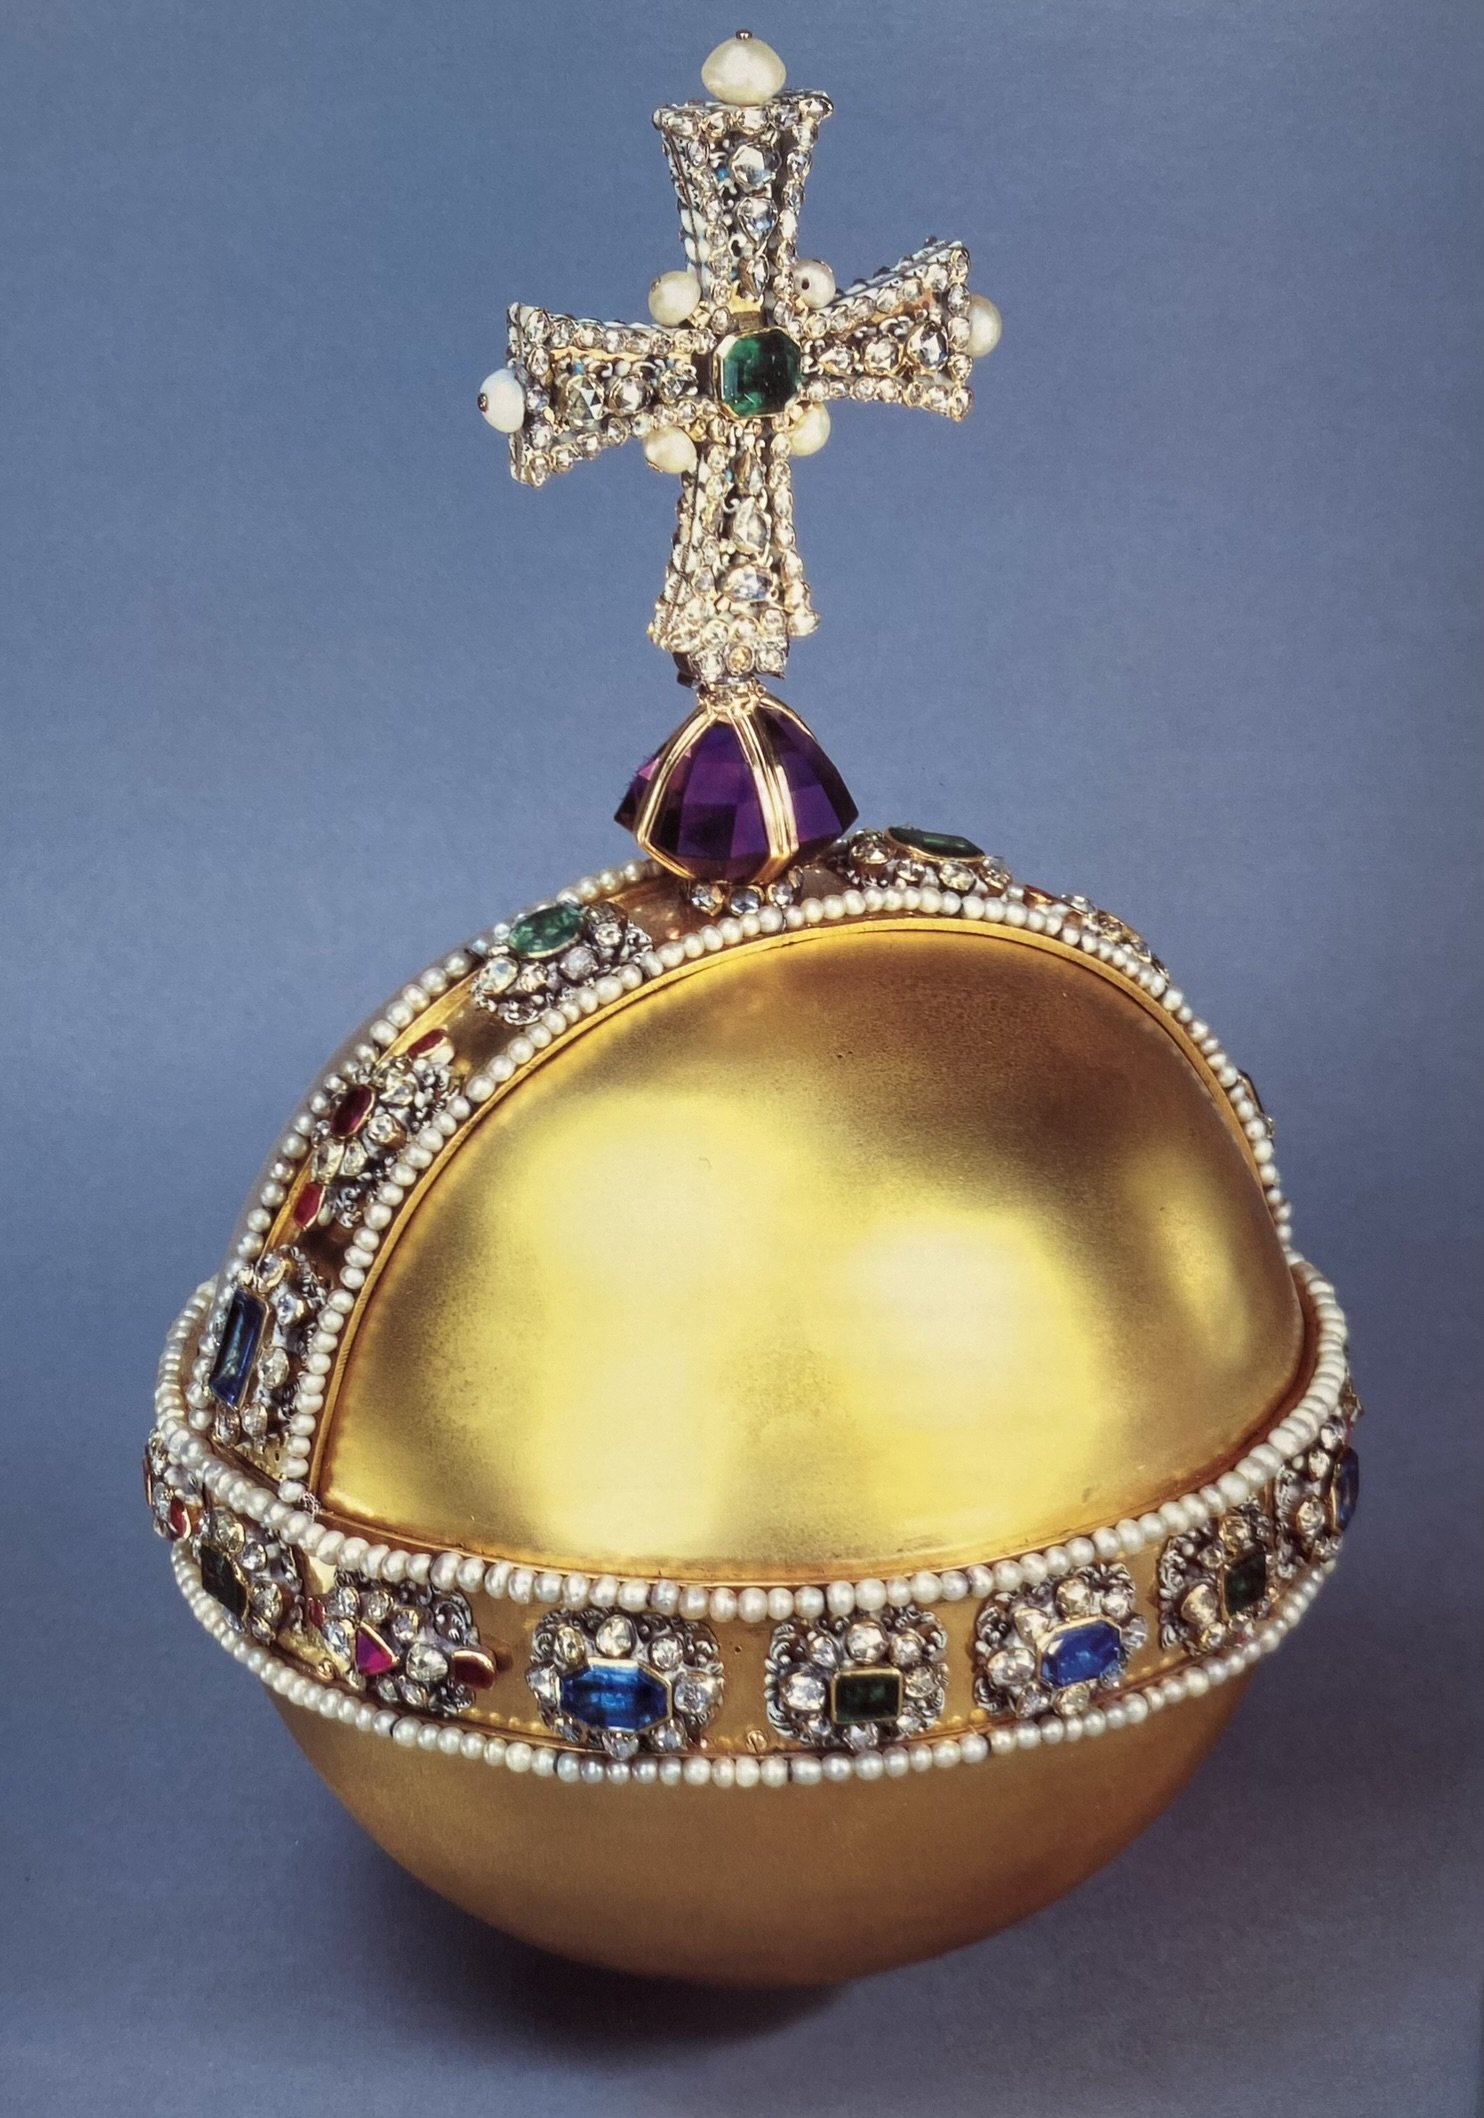 The Sovereign’s Orb - jewelled golden ball with a cross on top